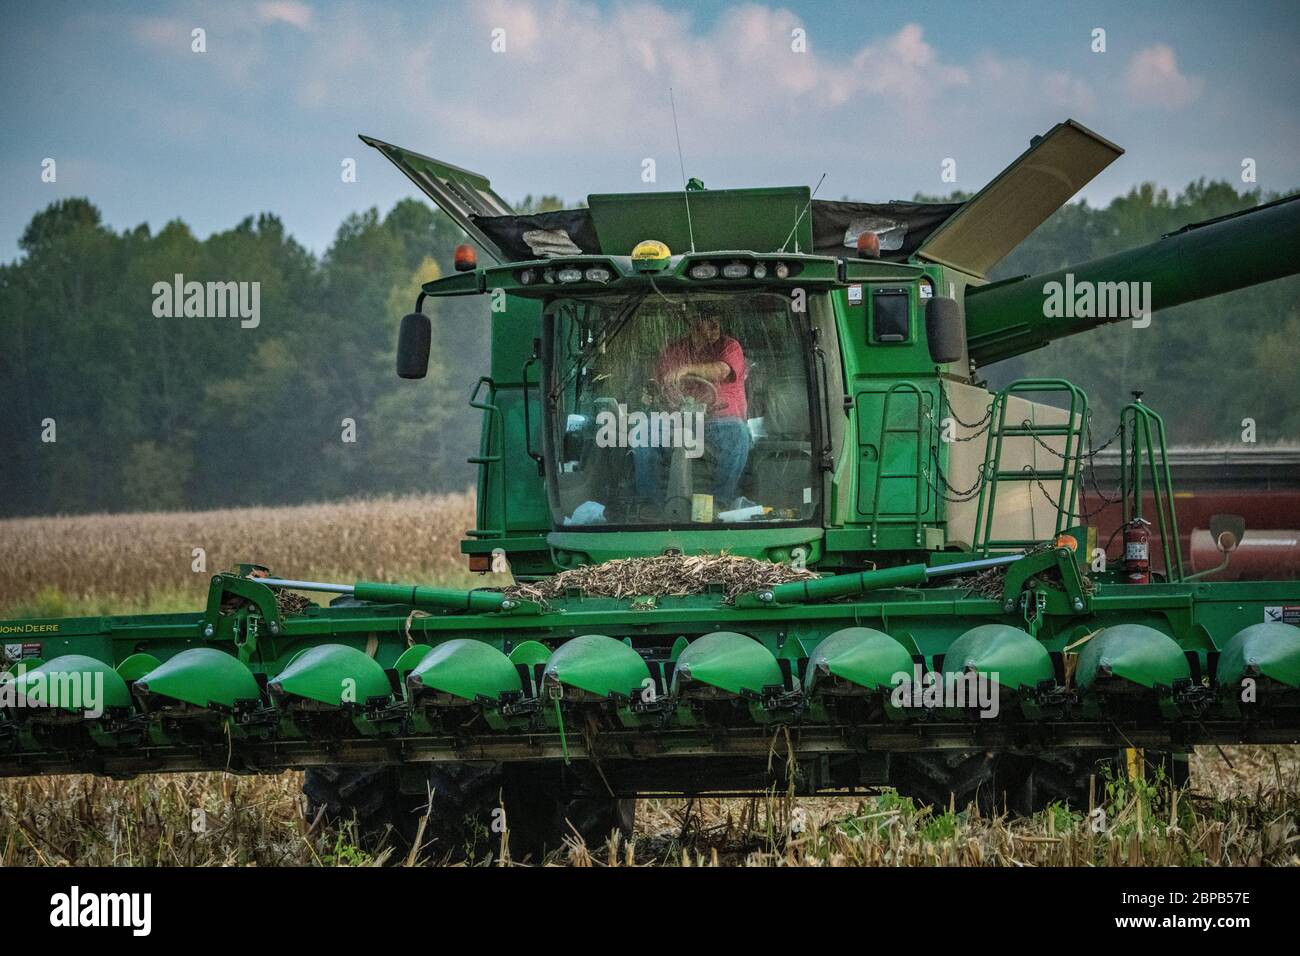 David Renfroe uses a GPS directed harvester to harvest the corn crop at his family farm September 18, 2019 in Carroll County, Tennessee. The farm utilizes conservation practices developed with the USDA to balance land stewardship and production. Stock Photo